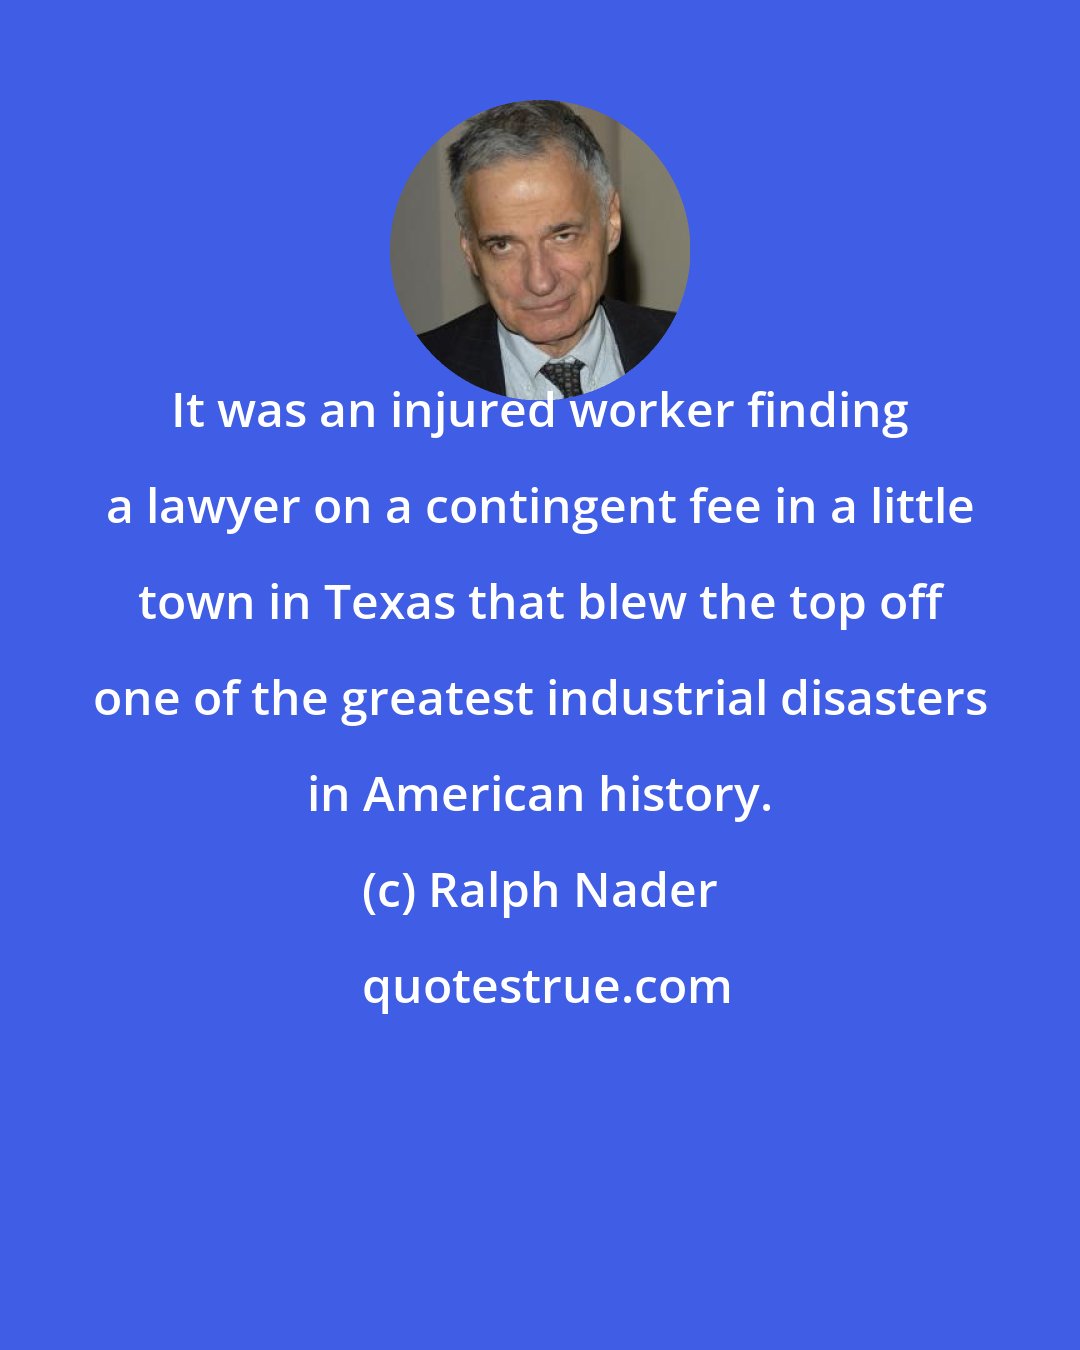 Ralph Nader: It was an injured worker finding a lawyer on a contingent fee in a little town in Texas that blew the top off one of the greatest industrial disasters in American history.